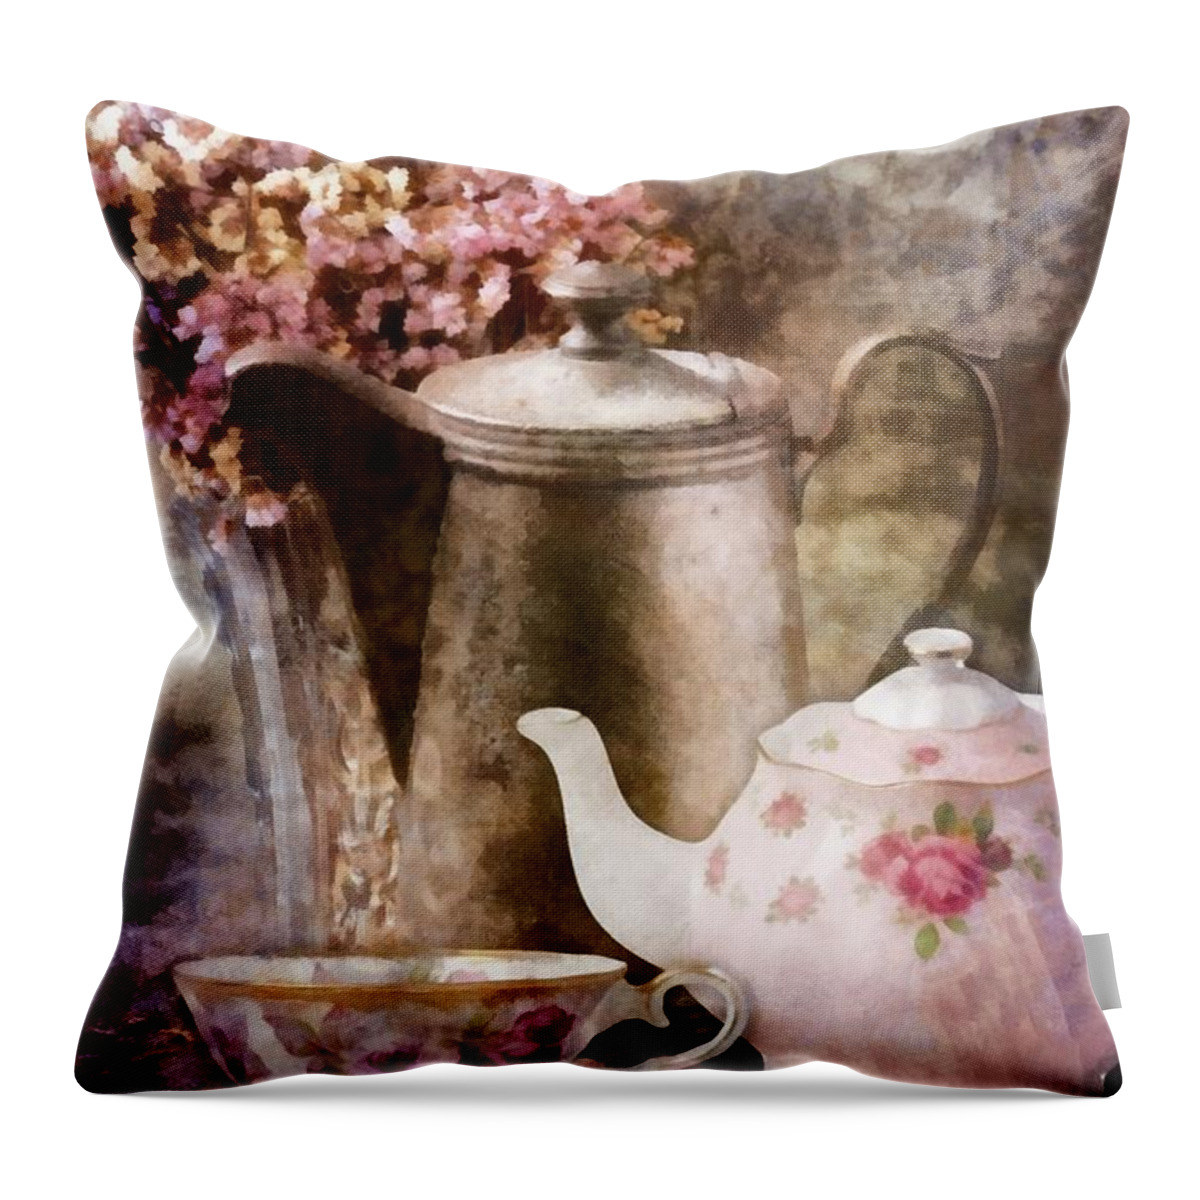 Tea And Grapes Throw Pillow featuring the painting Tea and Grapes by Mo T